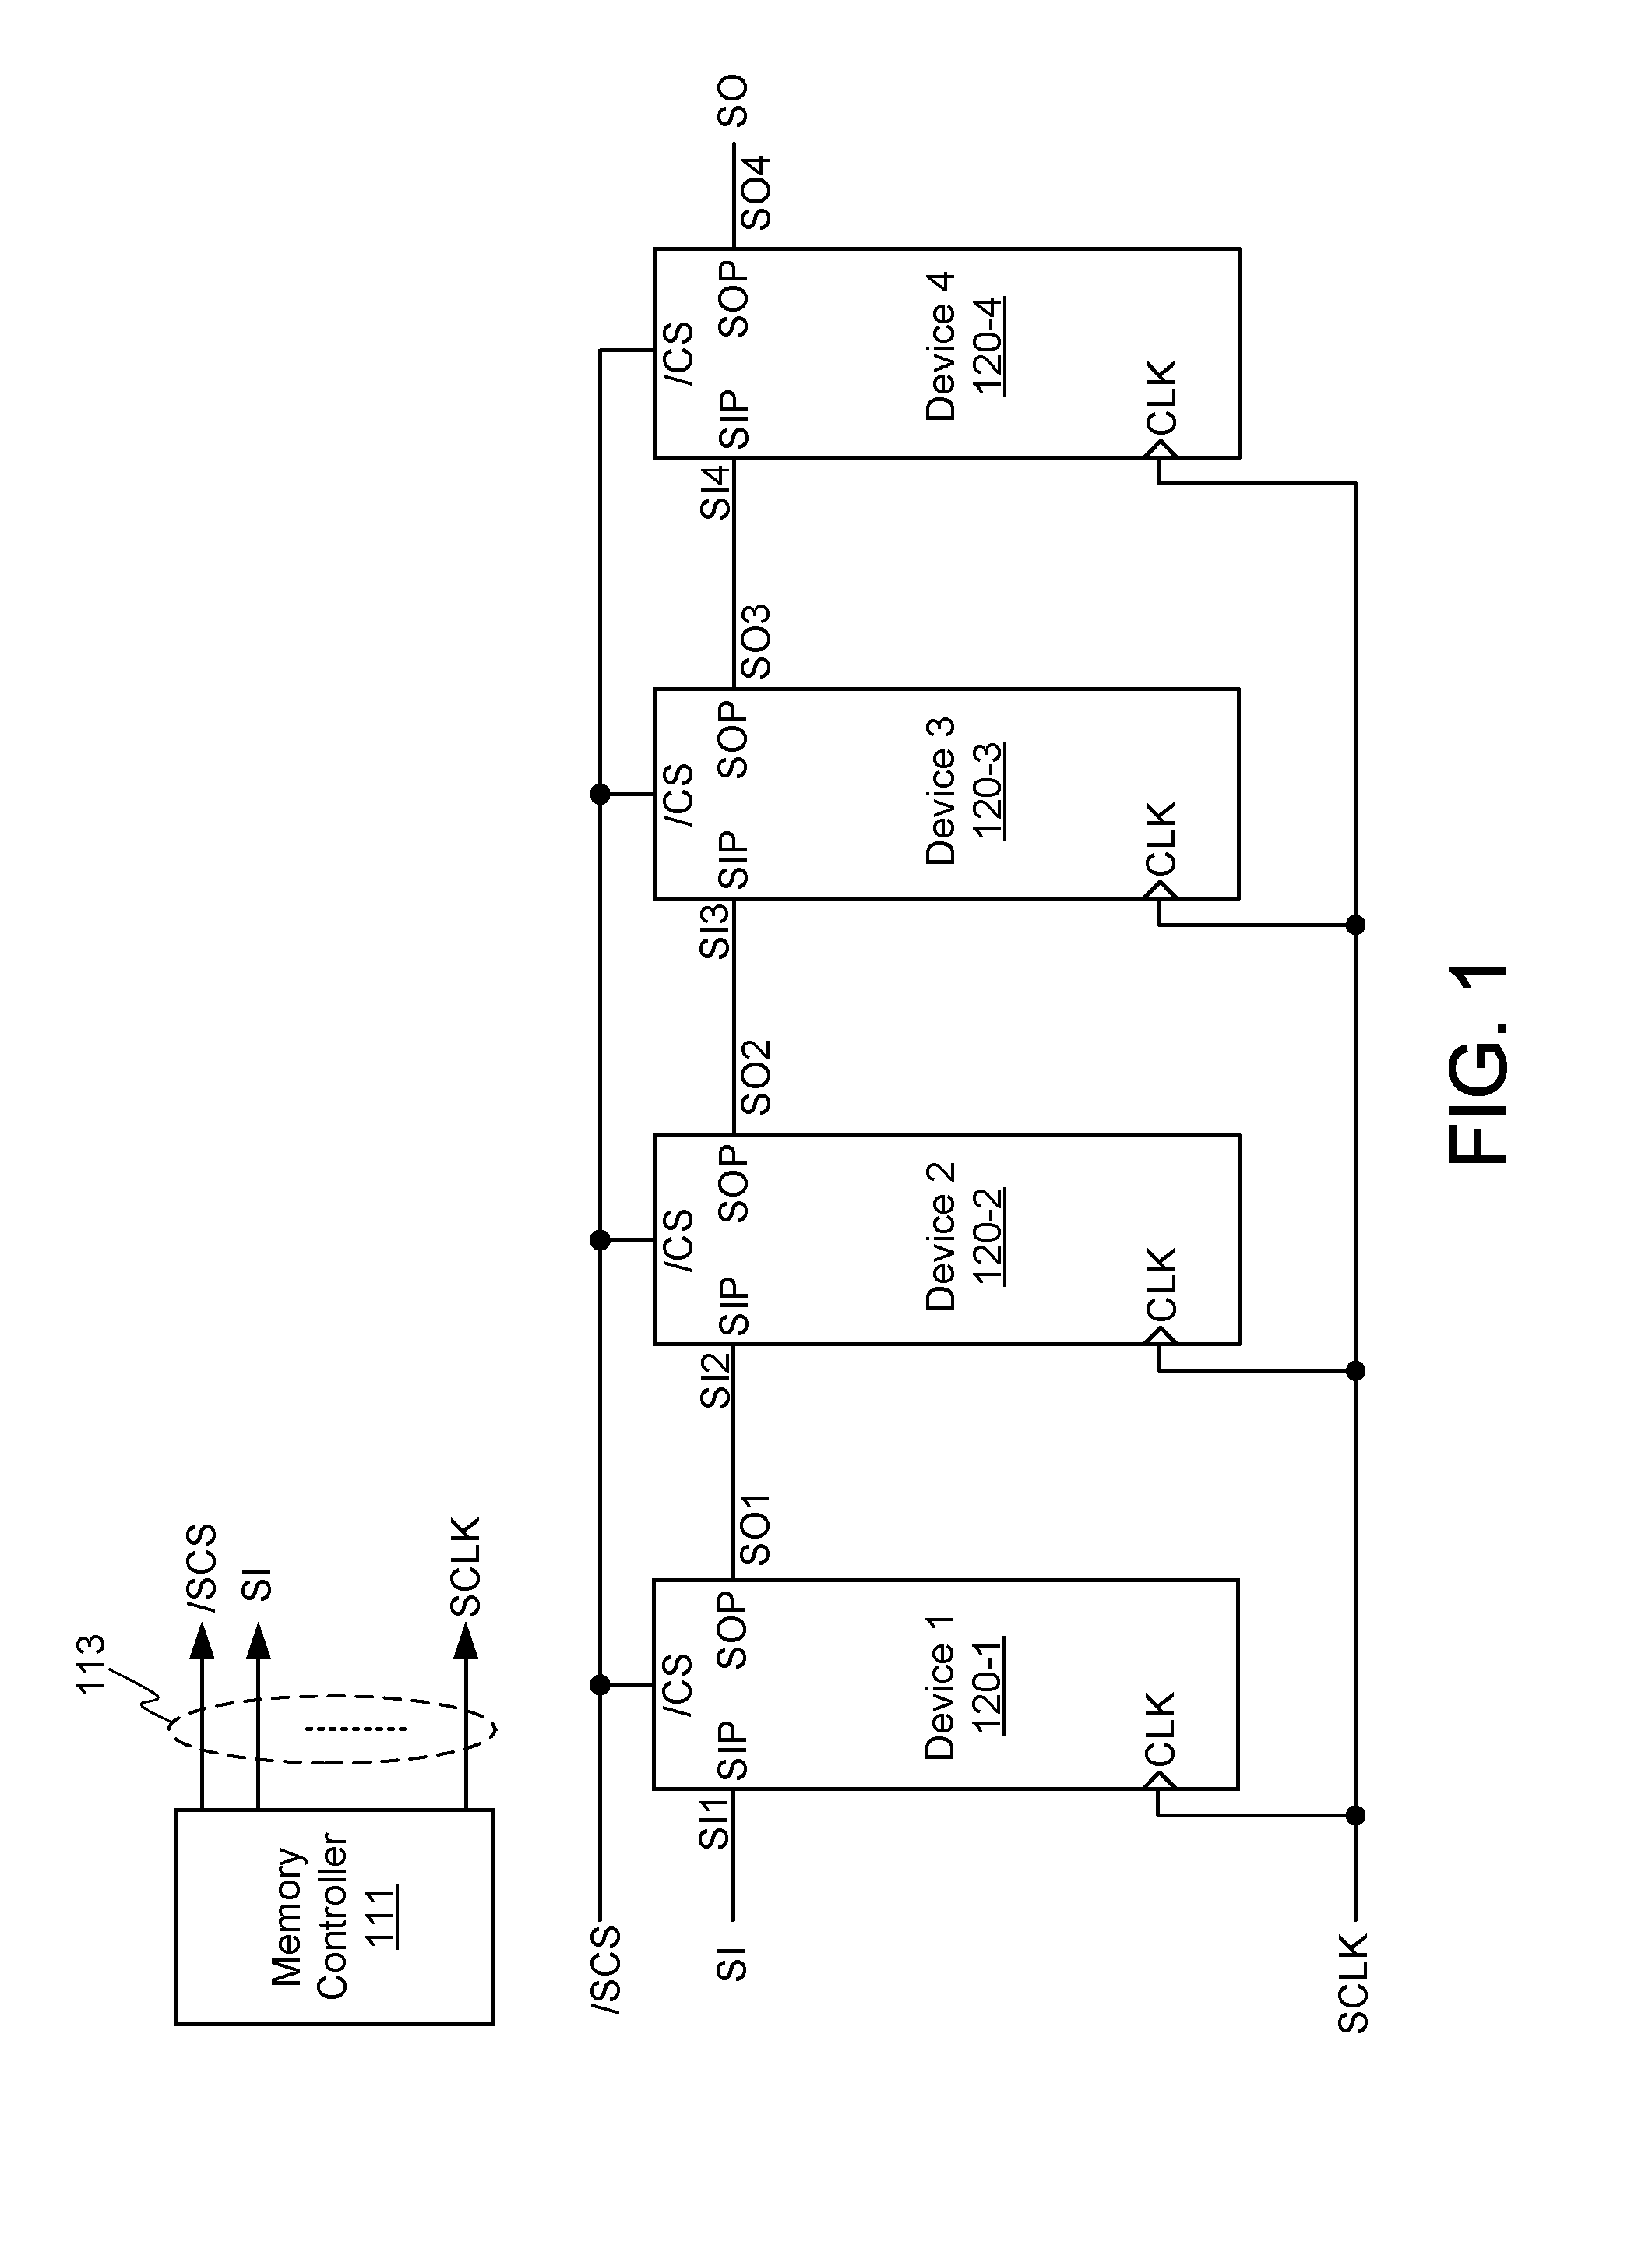 Apparatus and method for producing device identifiers for serially interconnected devices of mixed type